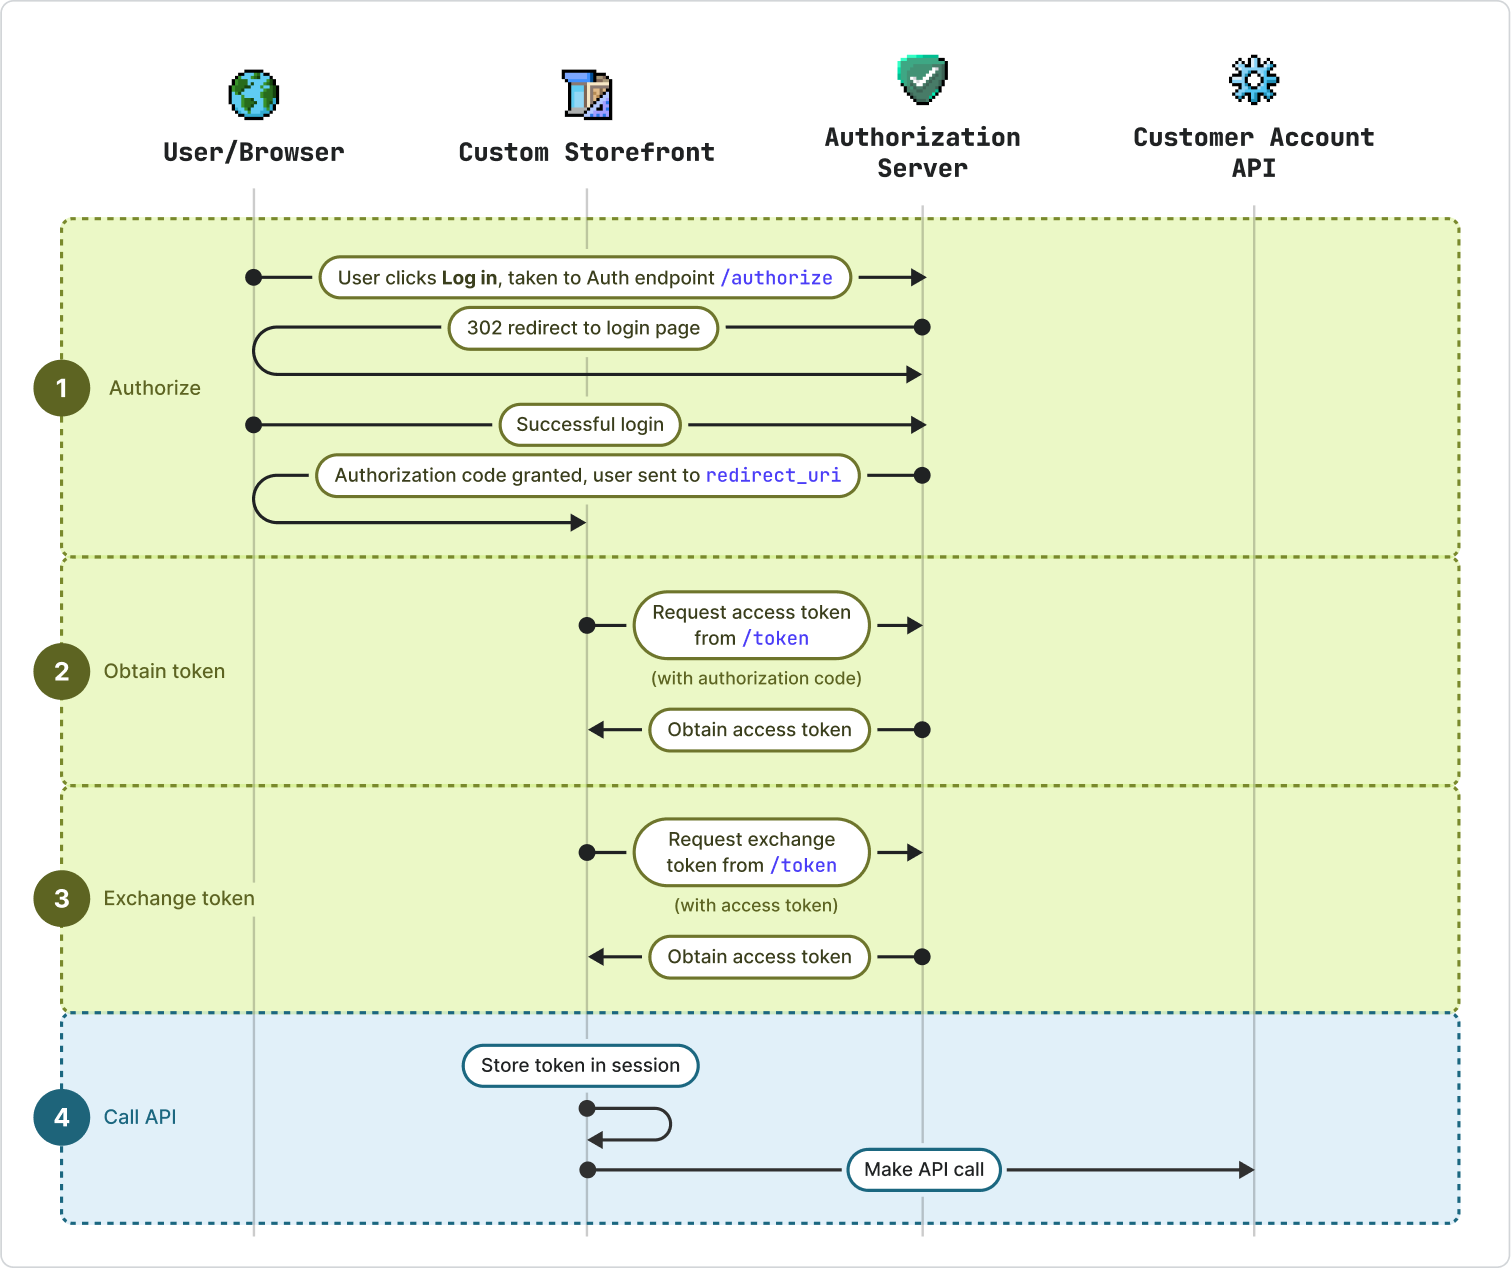 An image of the OAuth 2.0 authorization flow that needs to be implemented by the client